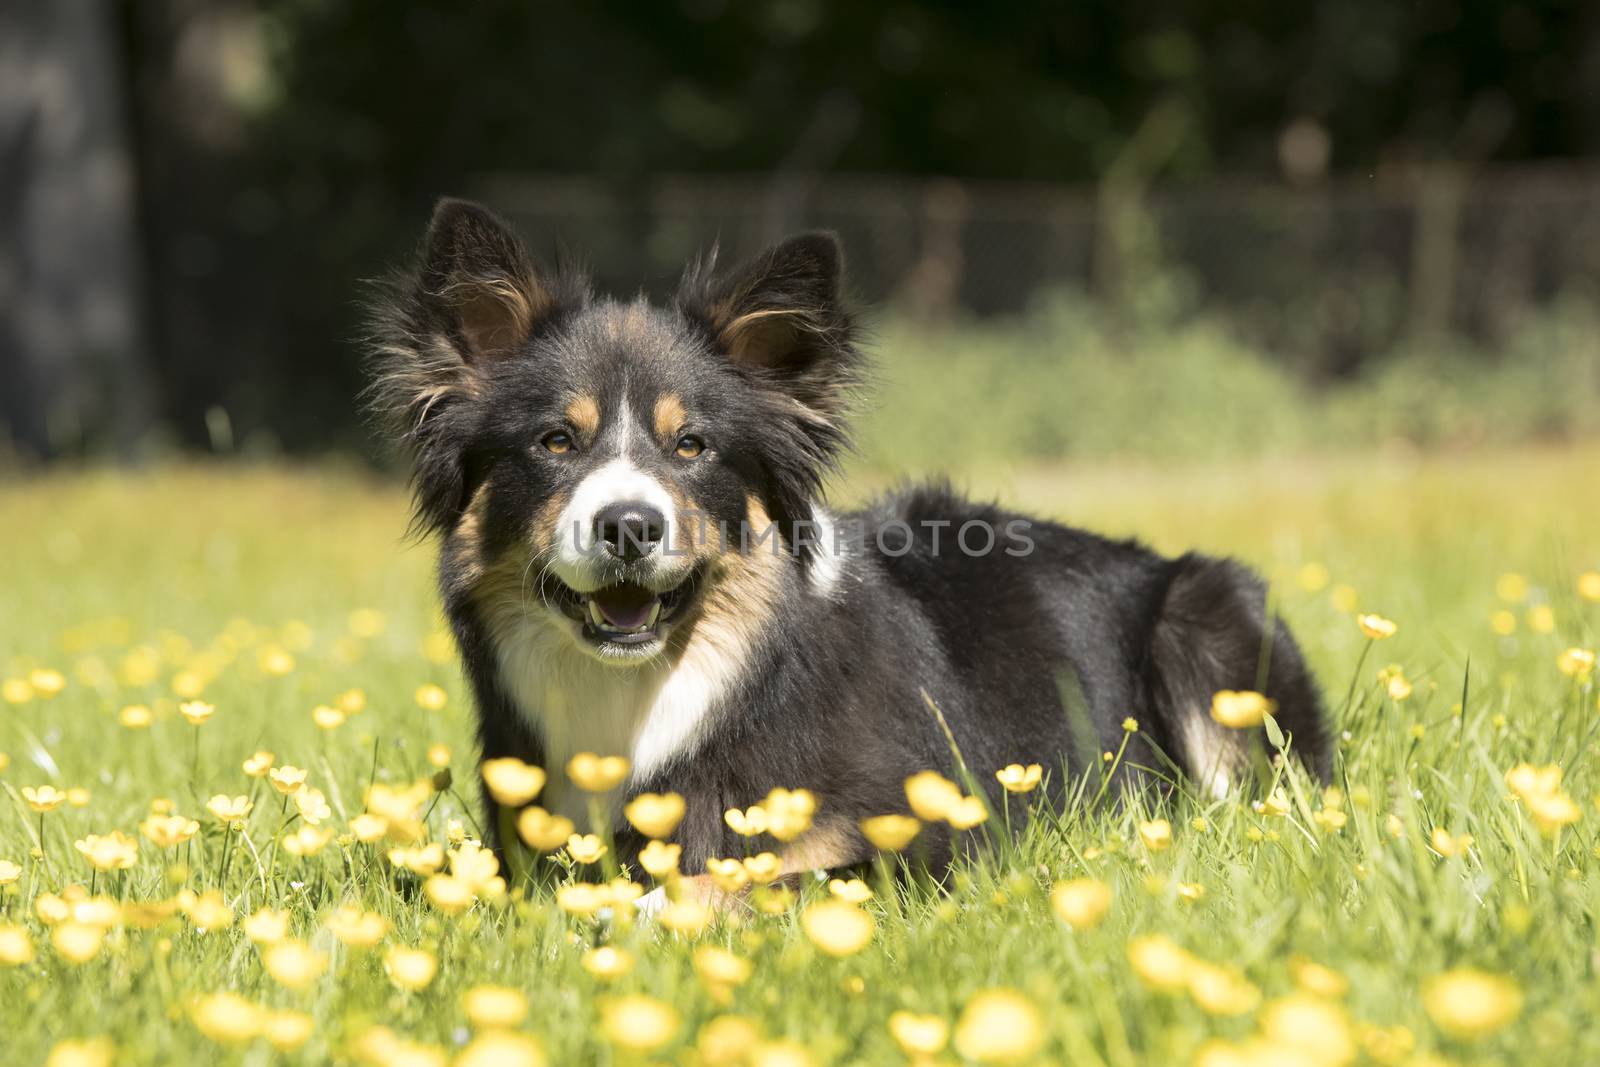 Dog, Border Collie, lying in grass with yellow flowers by avanheertum